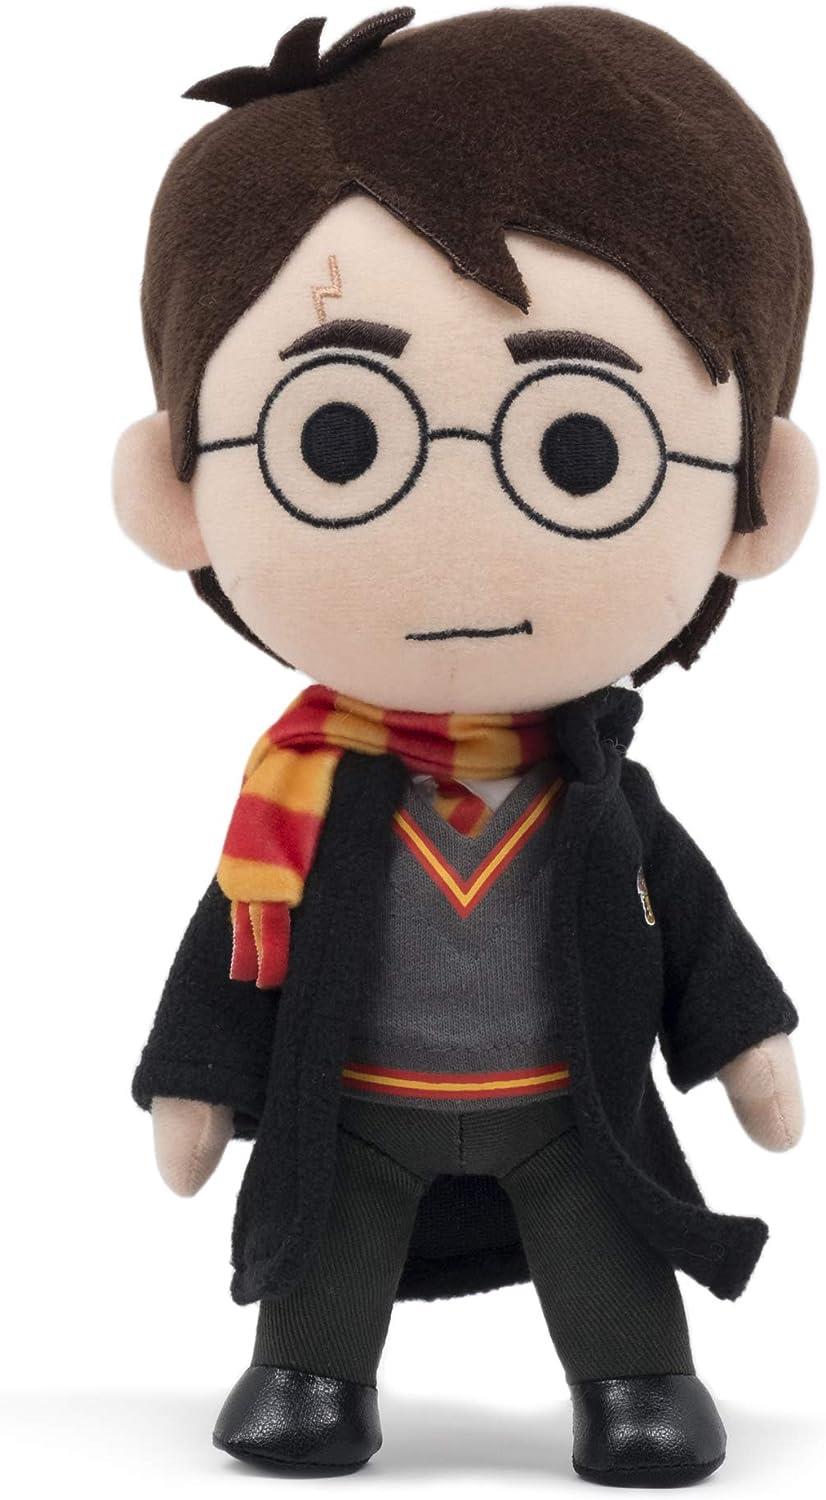 Harry Potter Q-Pal Plush Figure Toy 9 Gryffindor Scarf Sweater Collec –  Archies Toys